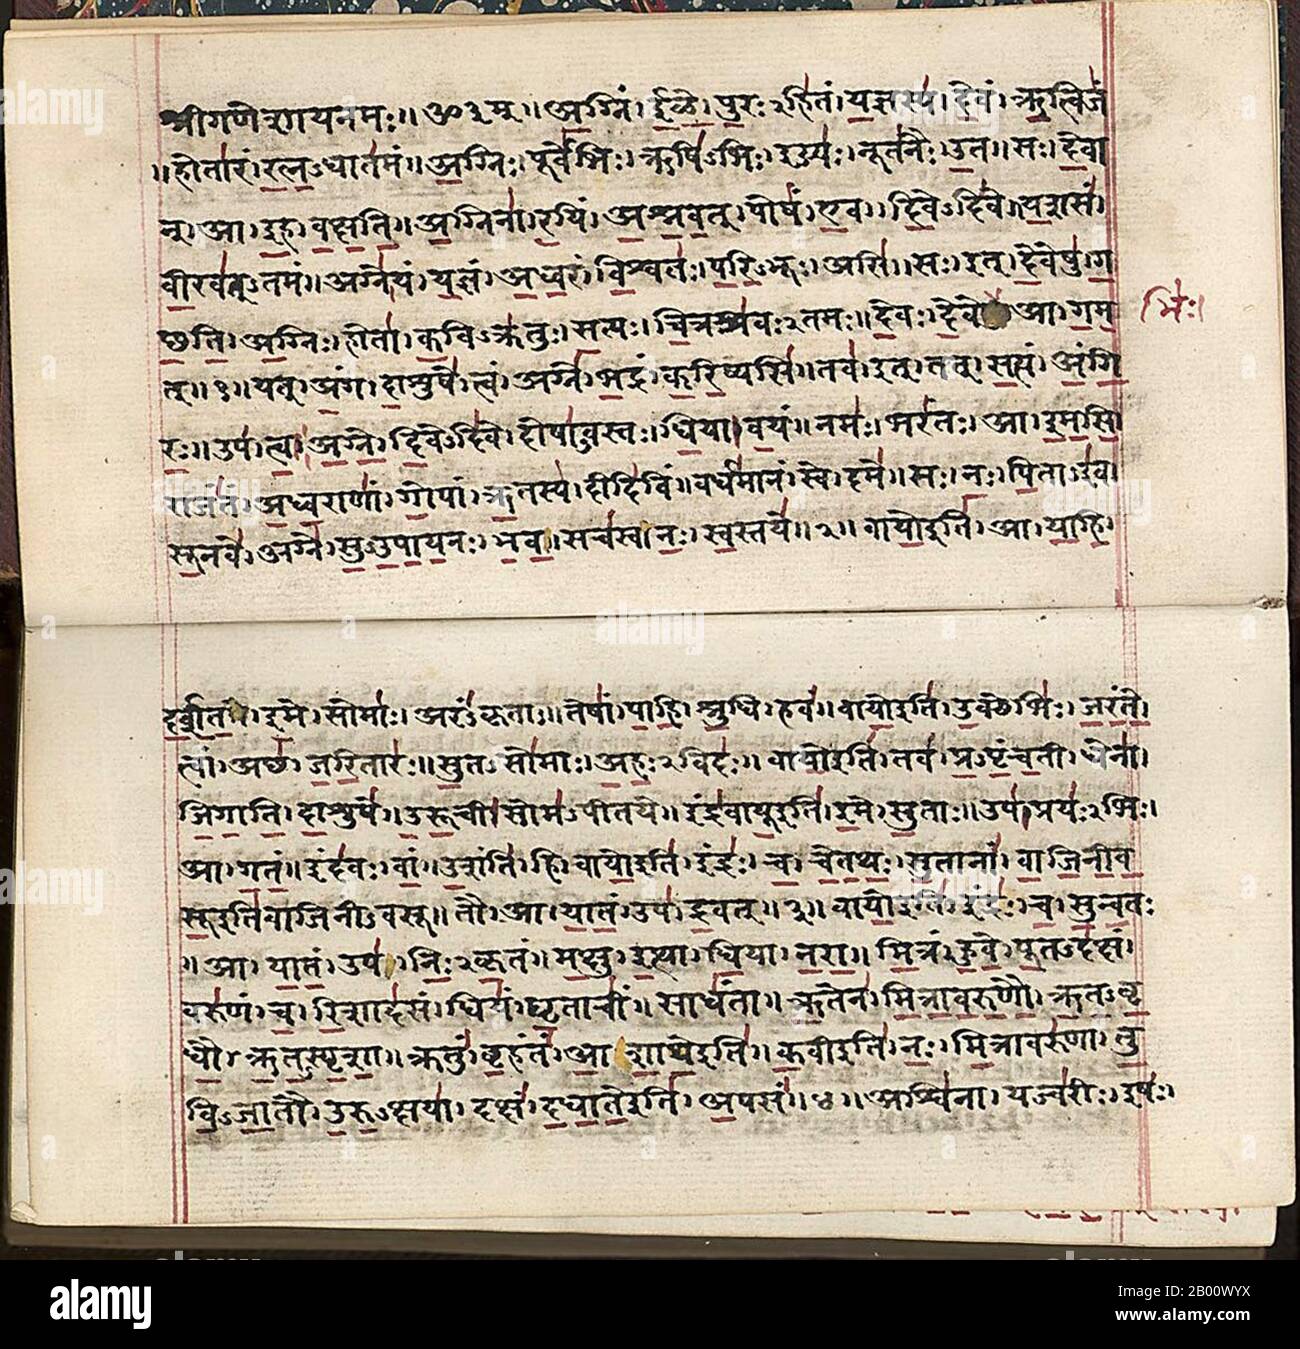 India: Rigveda manuscript in Devanagiri script, 19th century.  The Rigveda is an ancient Indian sacred collection of Vedic Sanskrit hymns. It is counted among the four canonical sacred texts (śruti) of Hinduism known as the Vedas. Some of its verses are still recited as Hindu prayers at religious functions and other occasions, putting these among the world's oldest religious texts in continued use. It is one of the oldest extant texts in any Indo-European language. Philological and linguistic evidence indicate that the Rigveda was composed in the north-western region of the Indian subcontinent Stock Photo